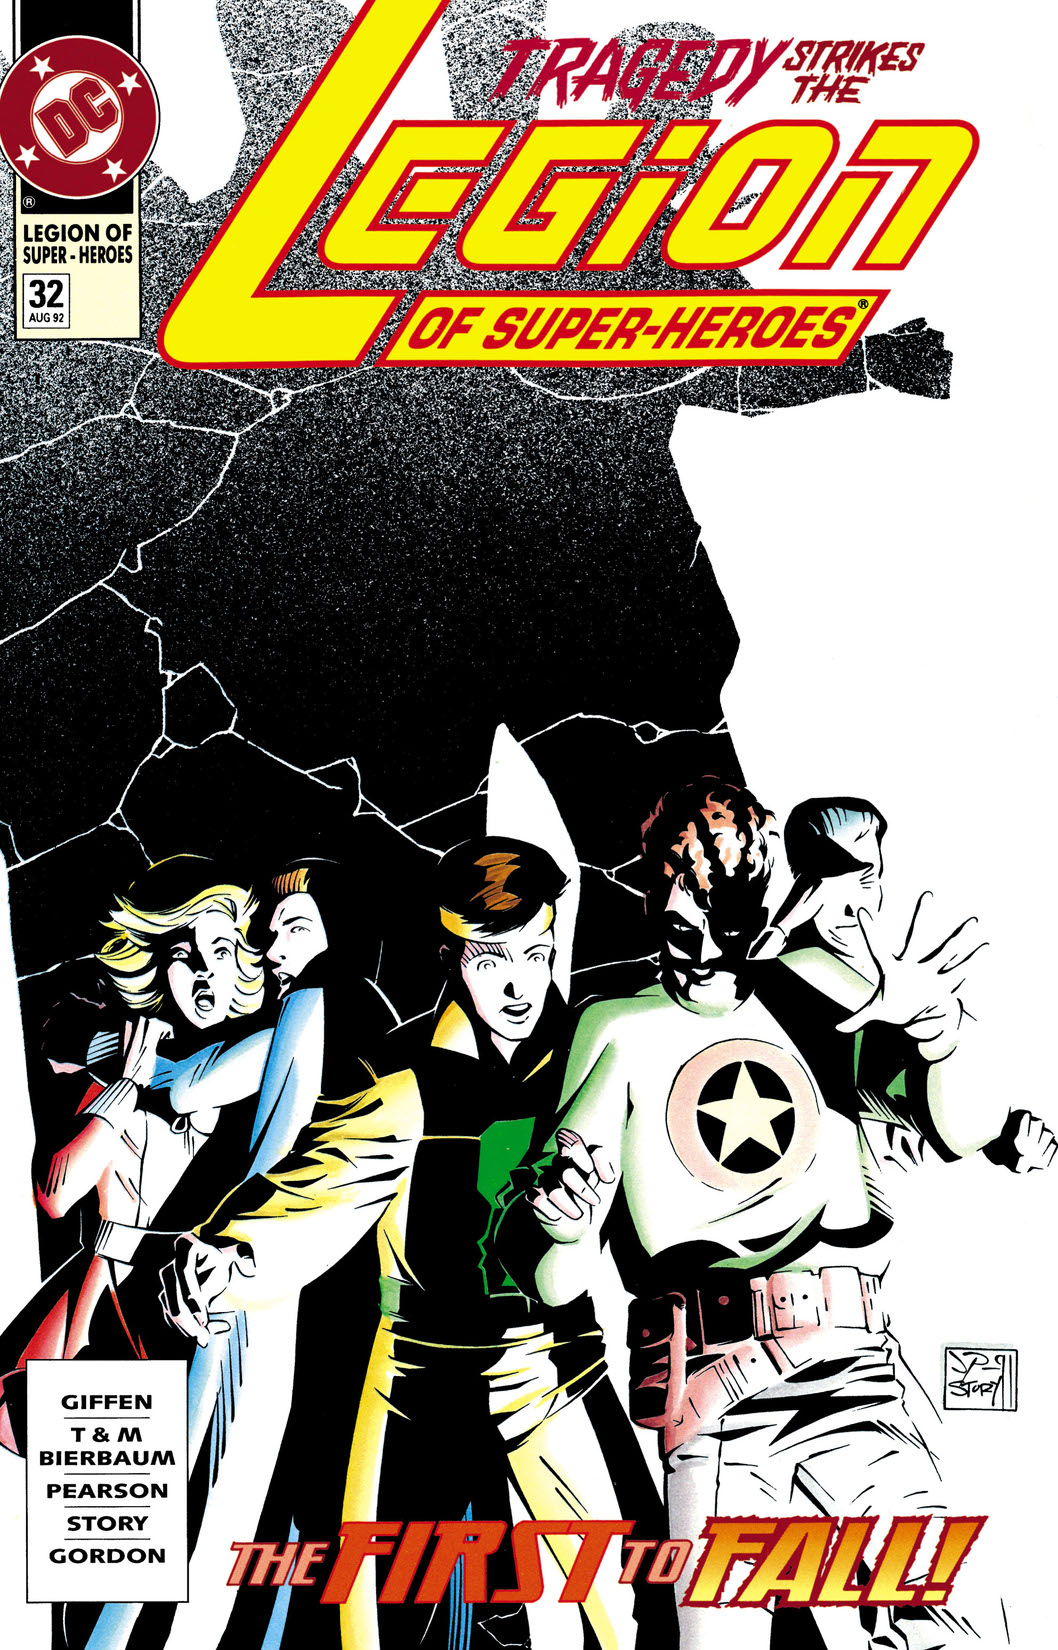 Legion of Super-Heroes (1989-) #32 preview images